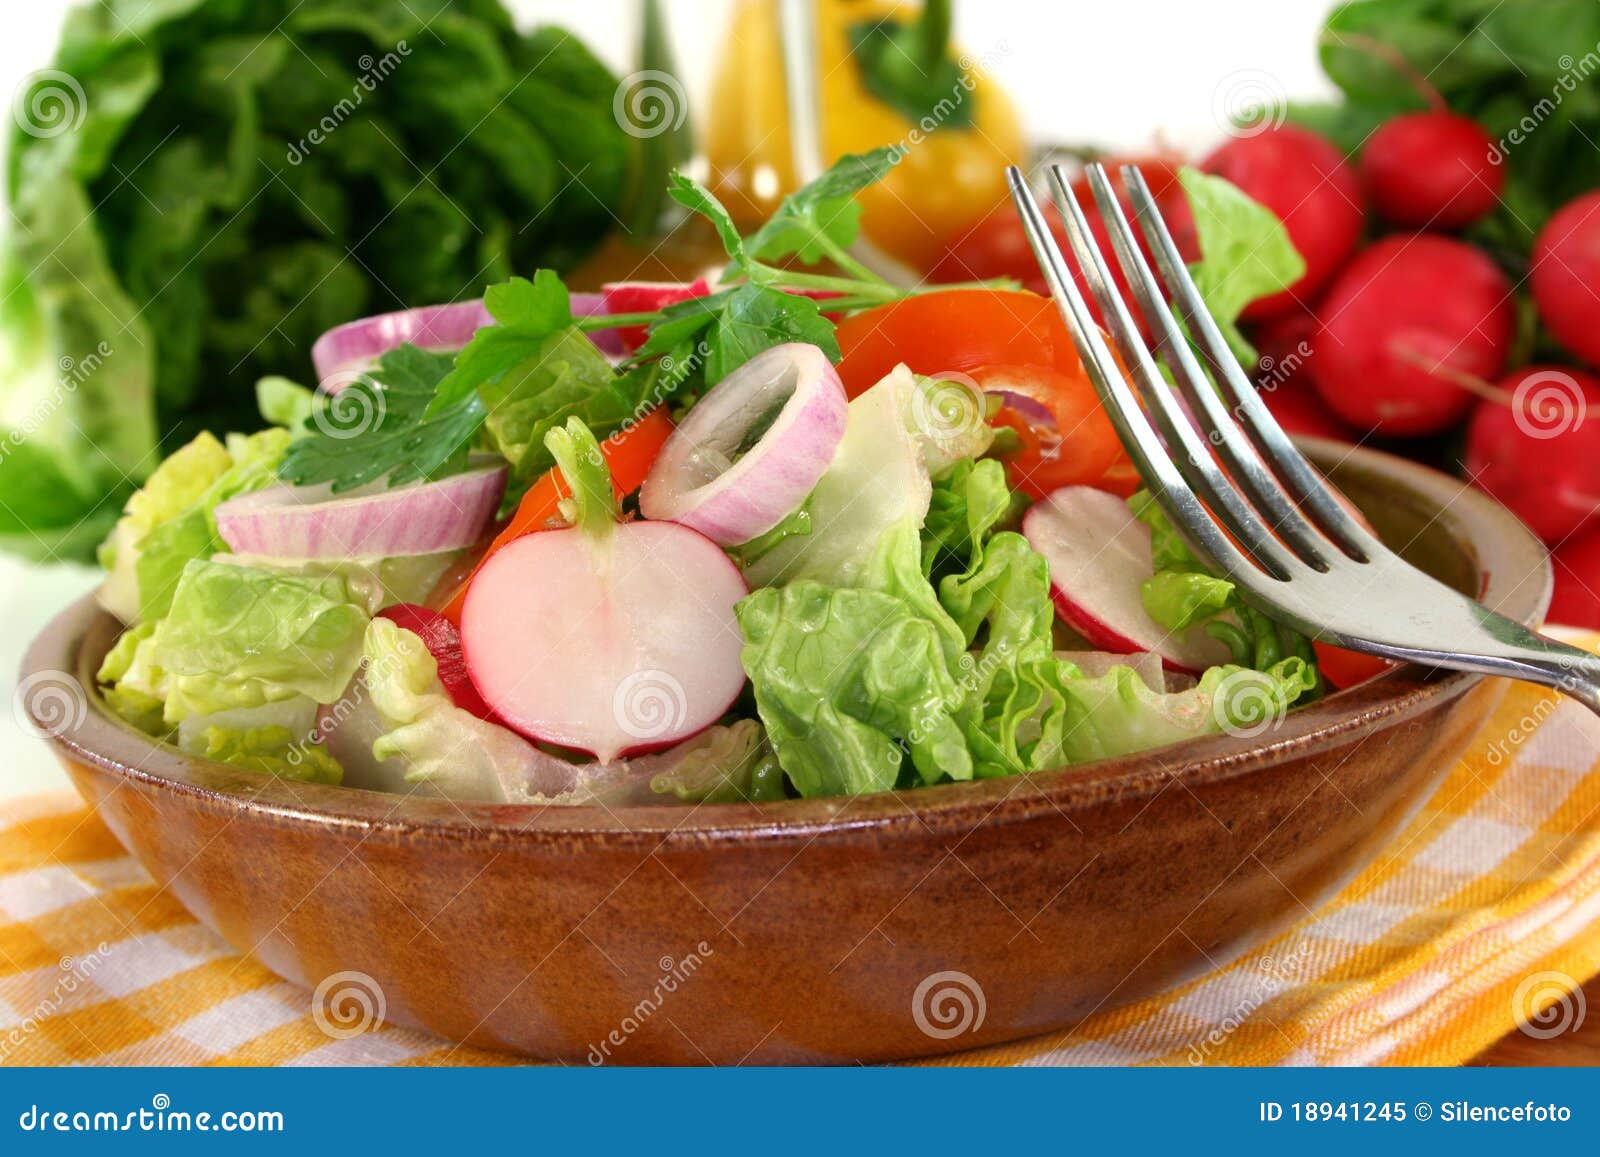 Mixed salad stock image. Image of vegetables, herbs, edible - 18941245